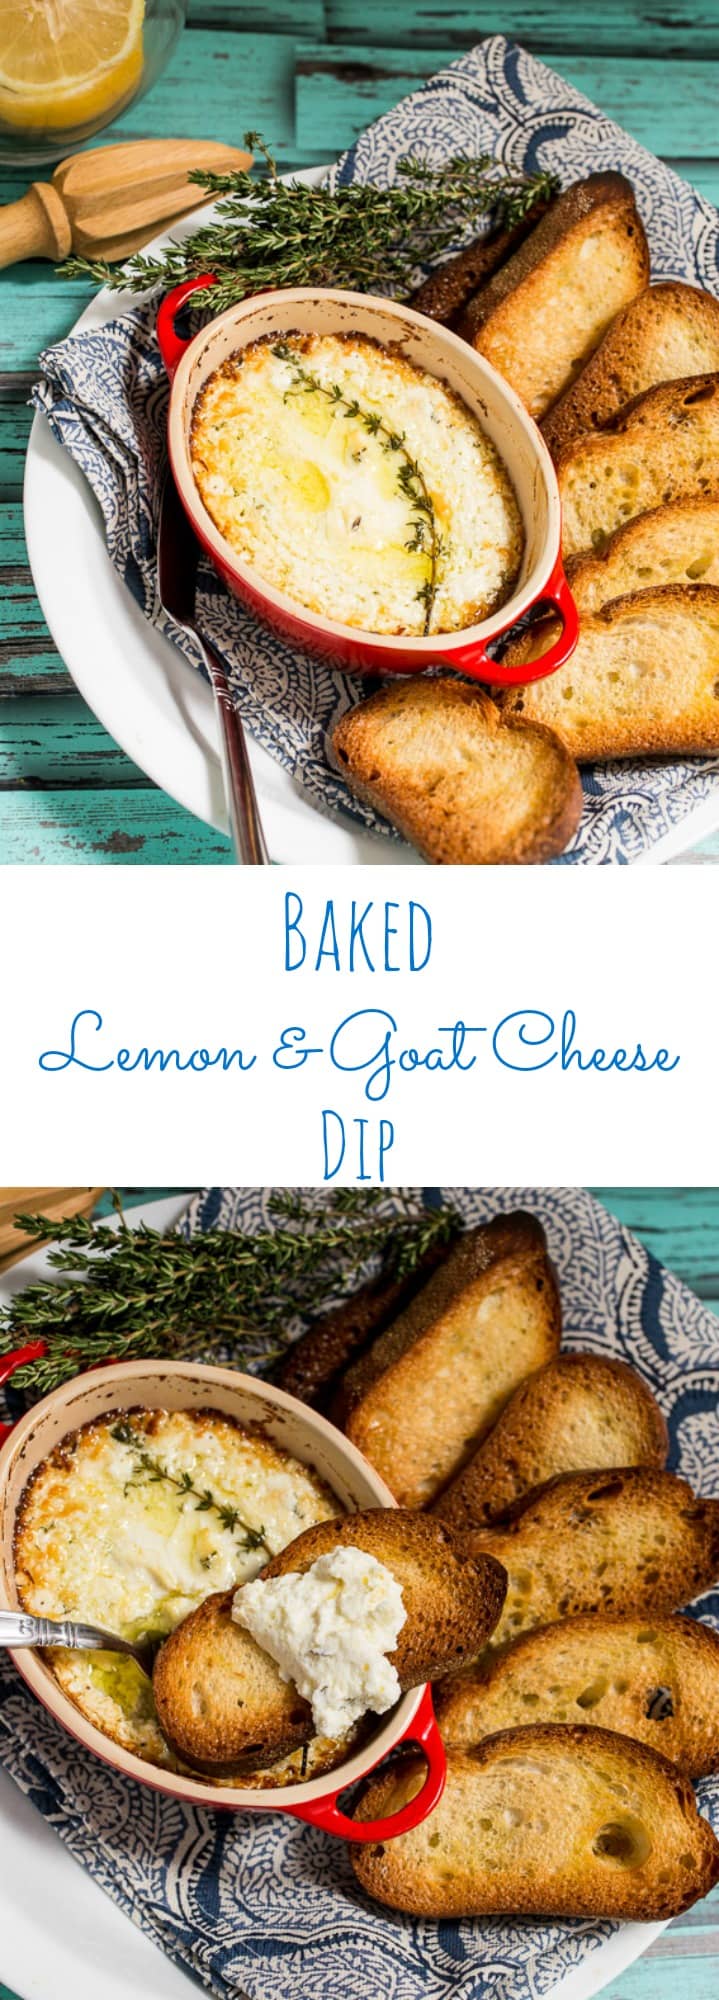 Baked Lemon and Goat Cheese Dip